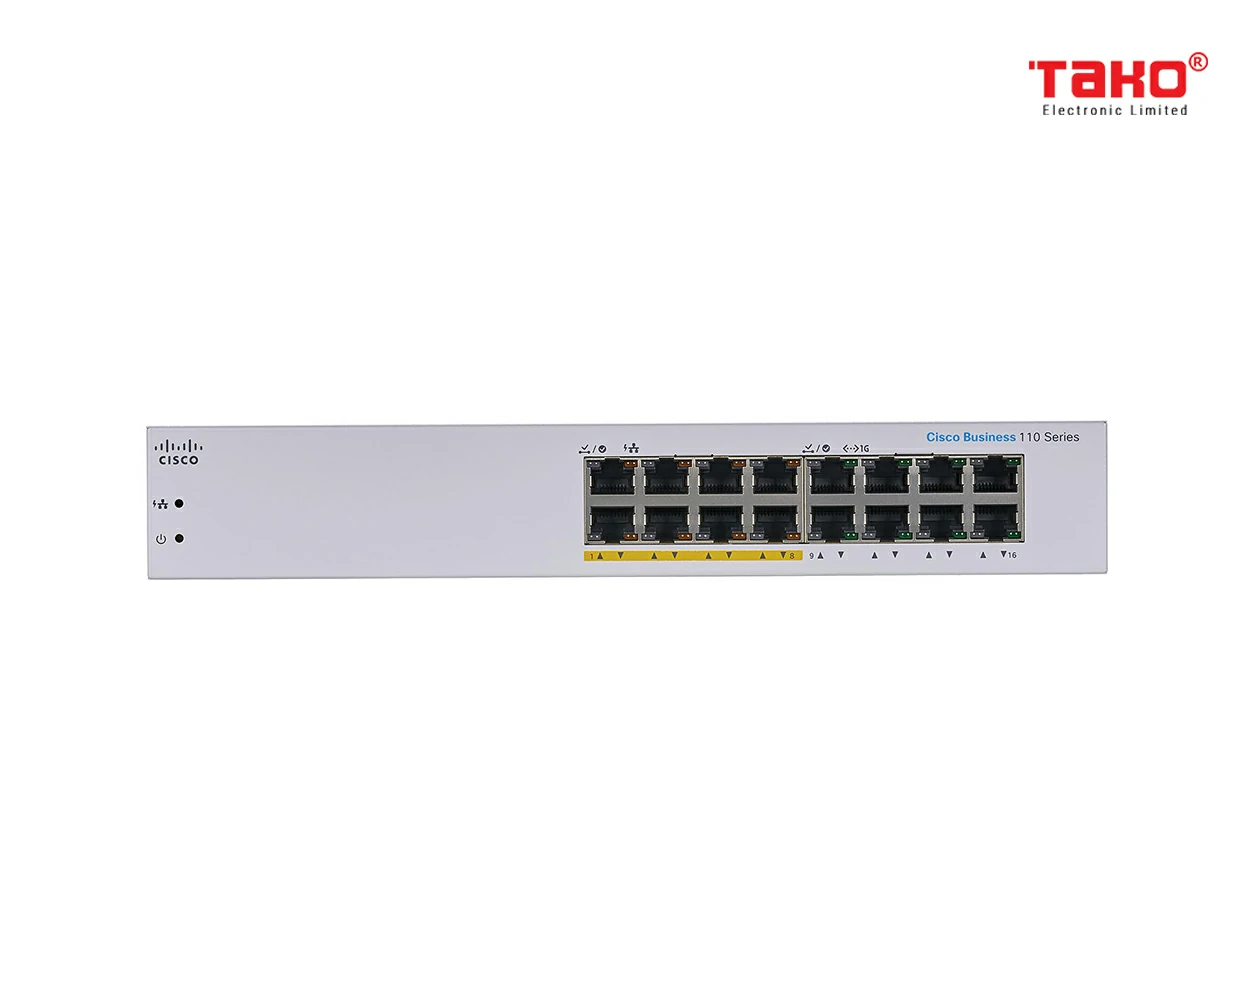 Cisco CBS110-16PP 16 port 10/100/1000 Mbps unmanageable switch, 8 of which are PoE 3